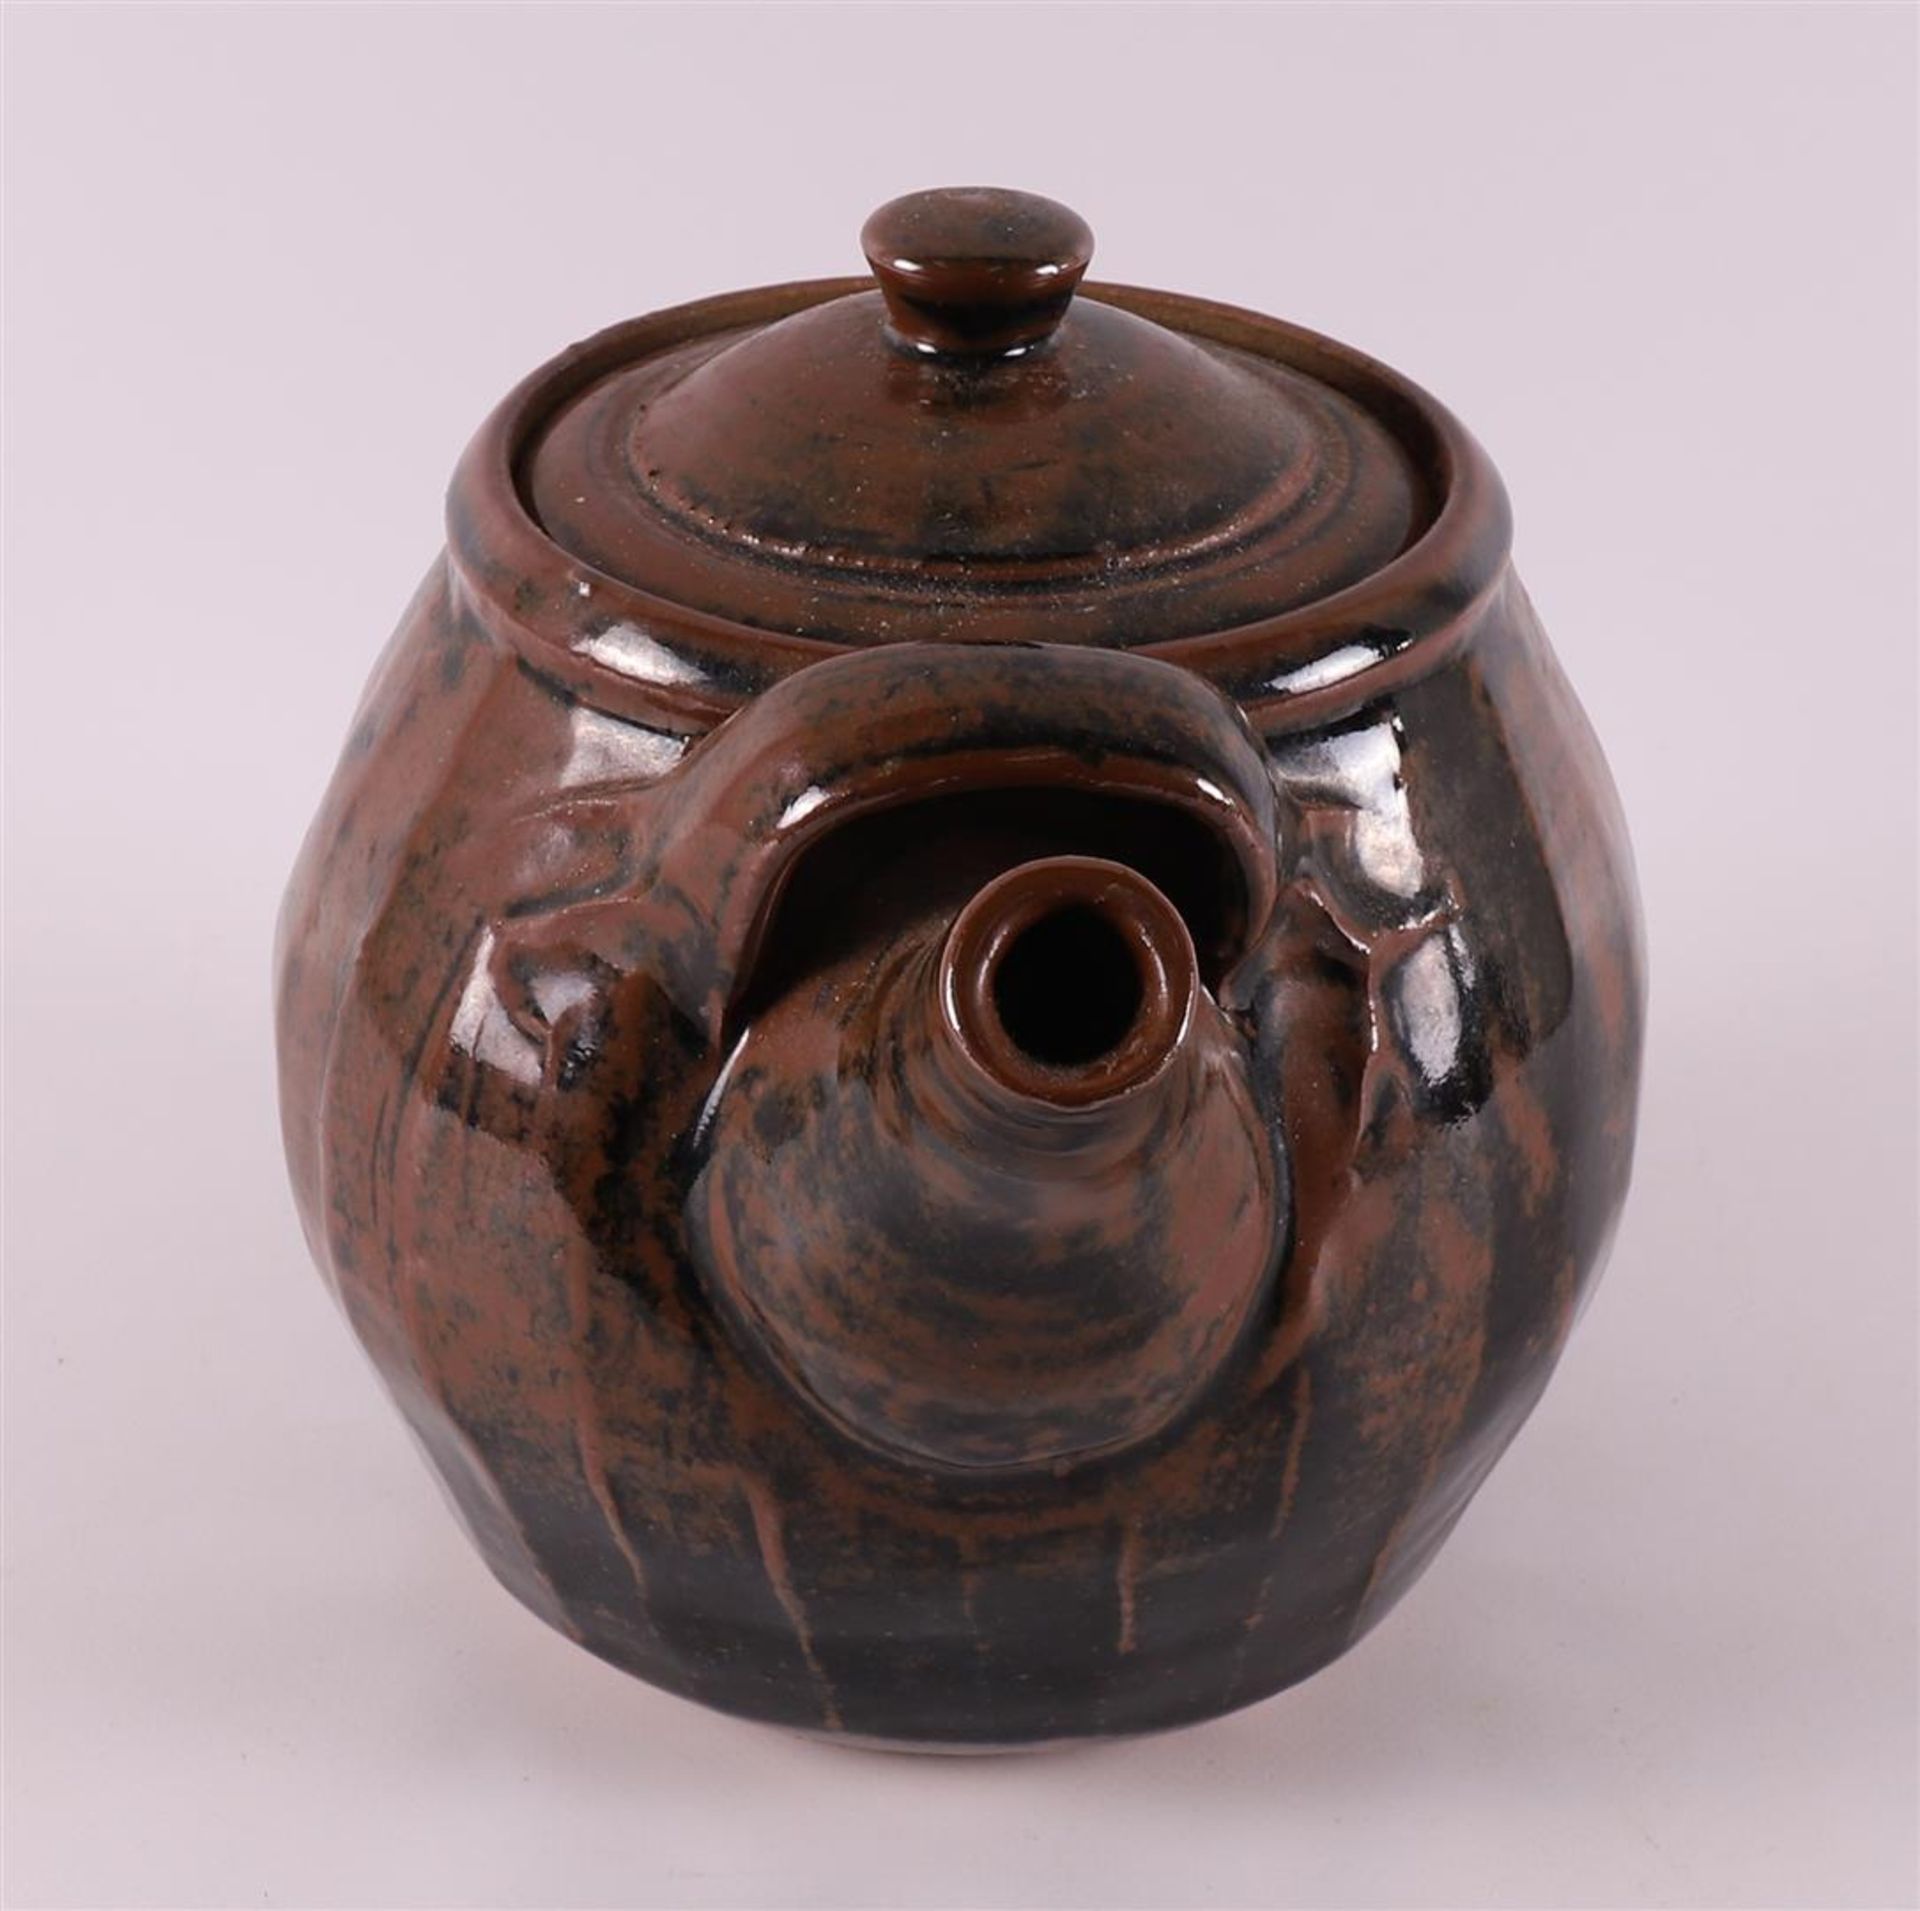 A brown glazed ceramic teapot, 2nd half of the 20th century. - Image 4 of 8